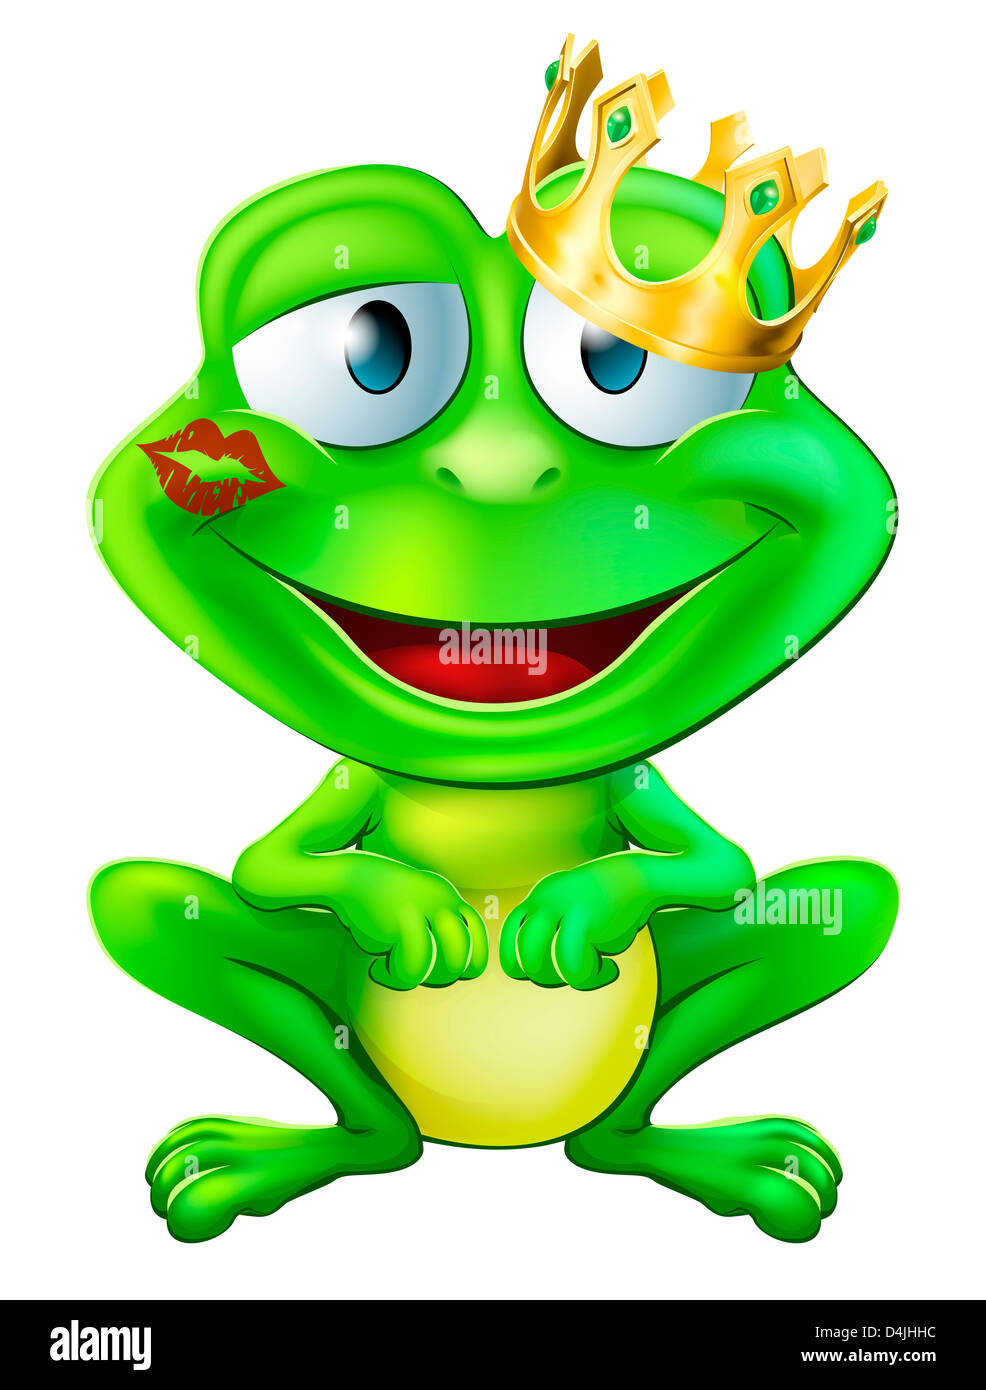 An illustration of a cute frog cartoon character wearing a gold crown with a red lipstick mark on his lips form a kiss Stock Photo